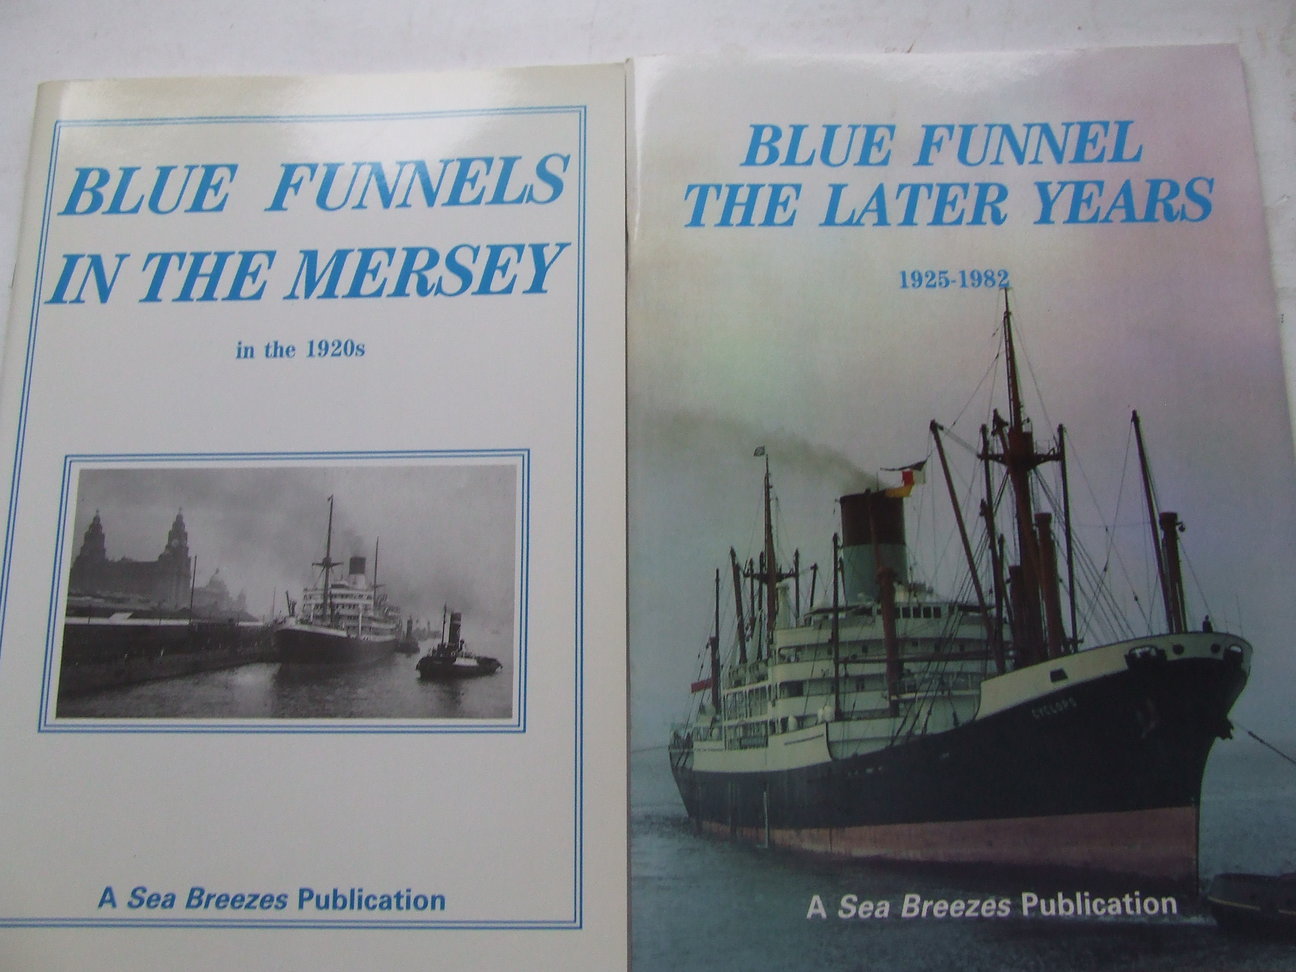 Blue Funnels in the Mersey in the 1920'S / Blue Funnel, the later years 1925-1982